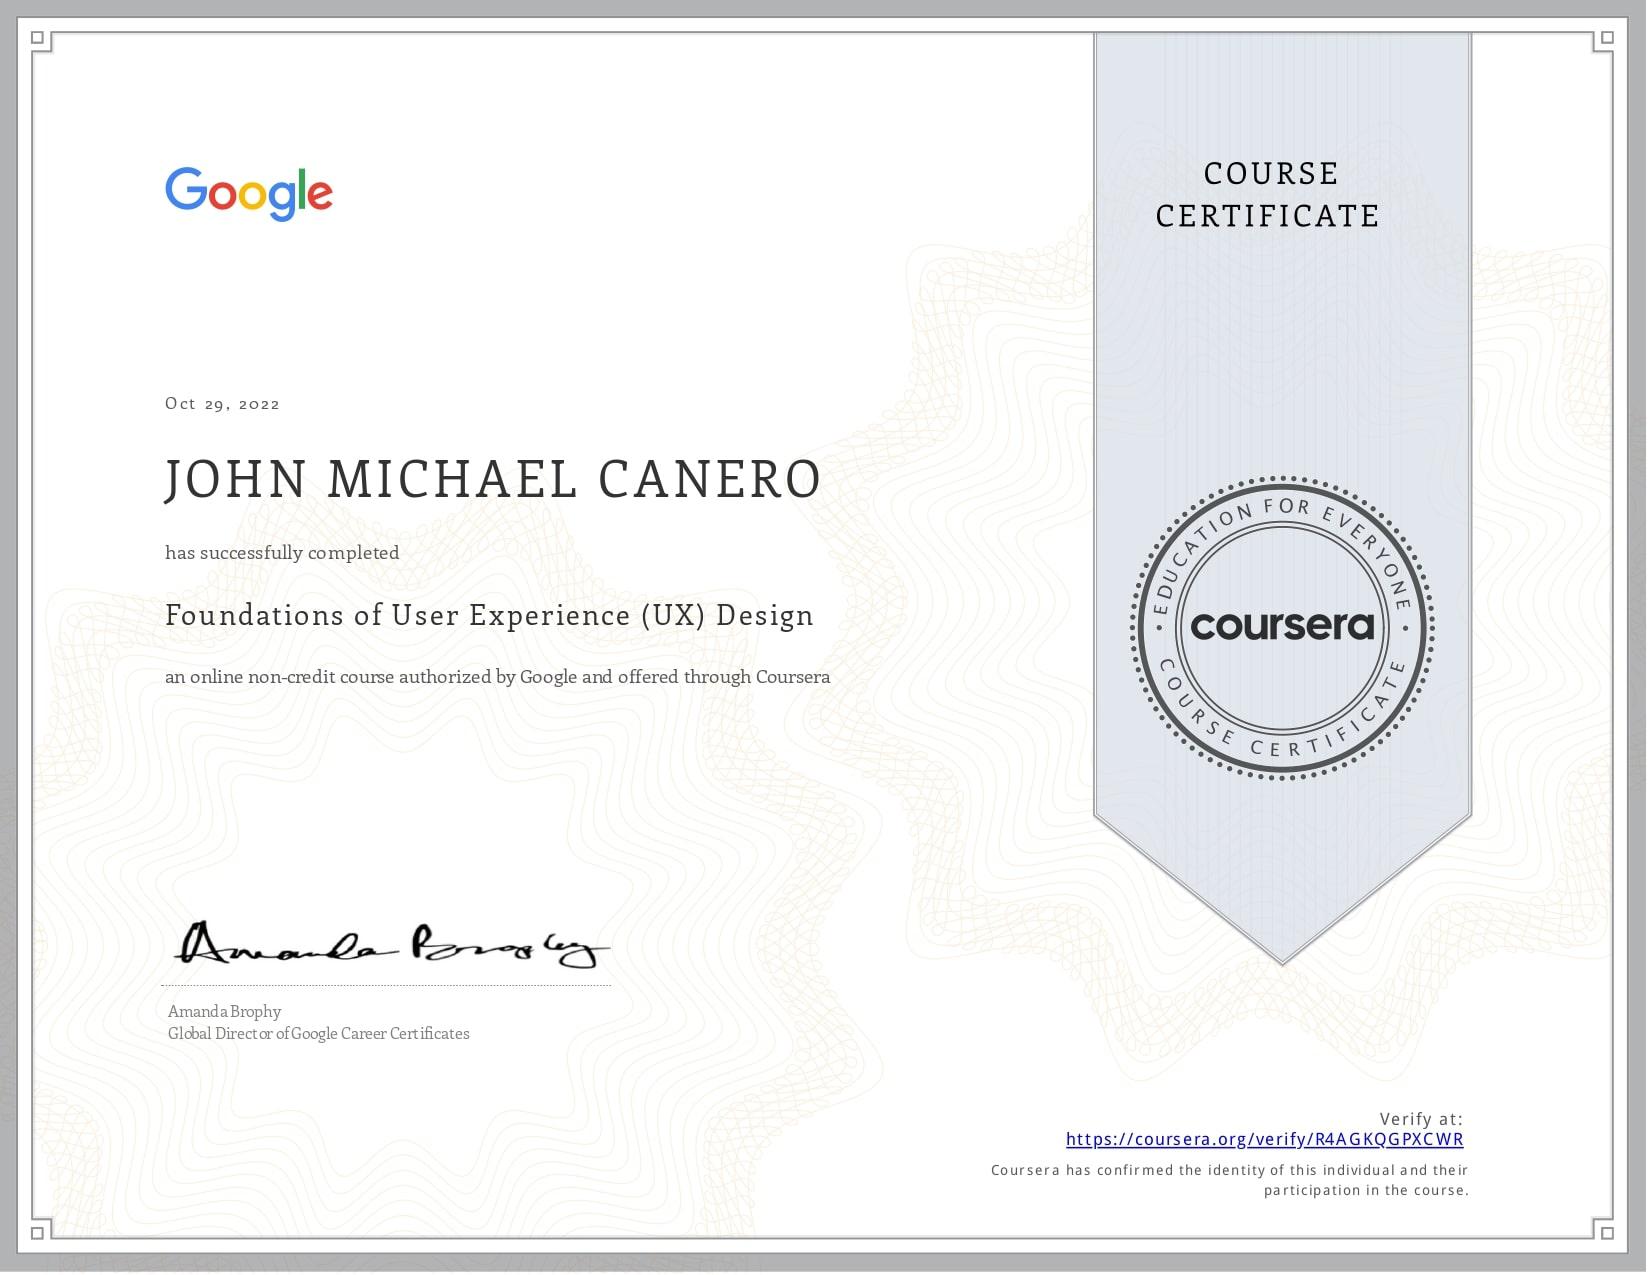 Google Certificate - Foundations of User Experience (UX) Design